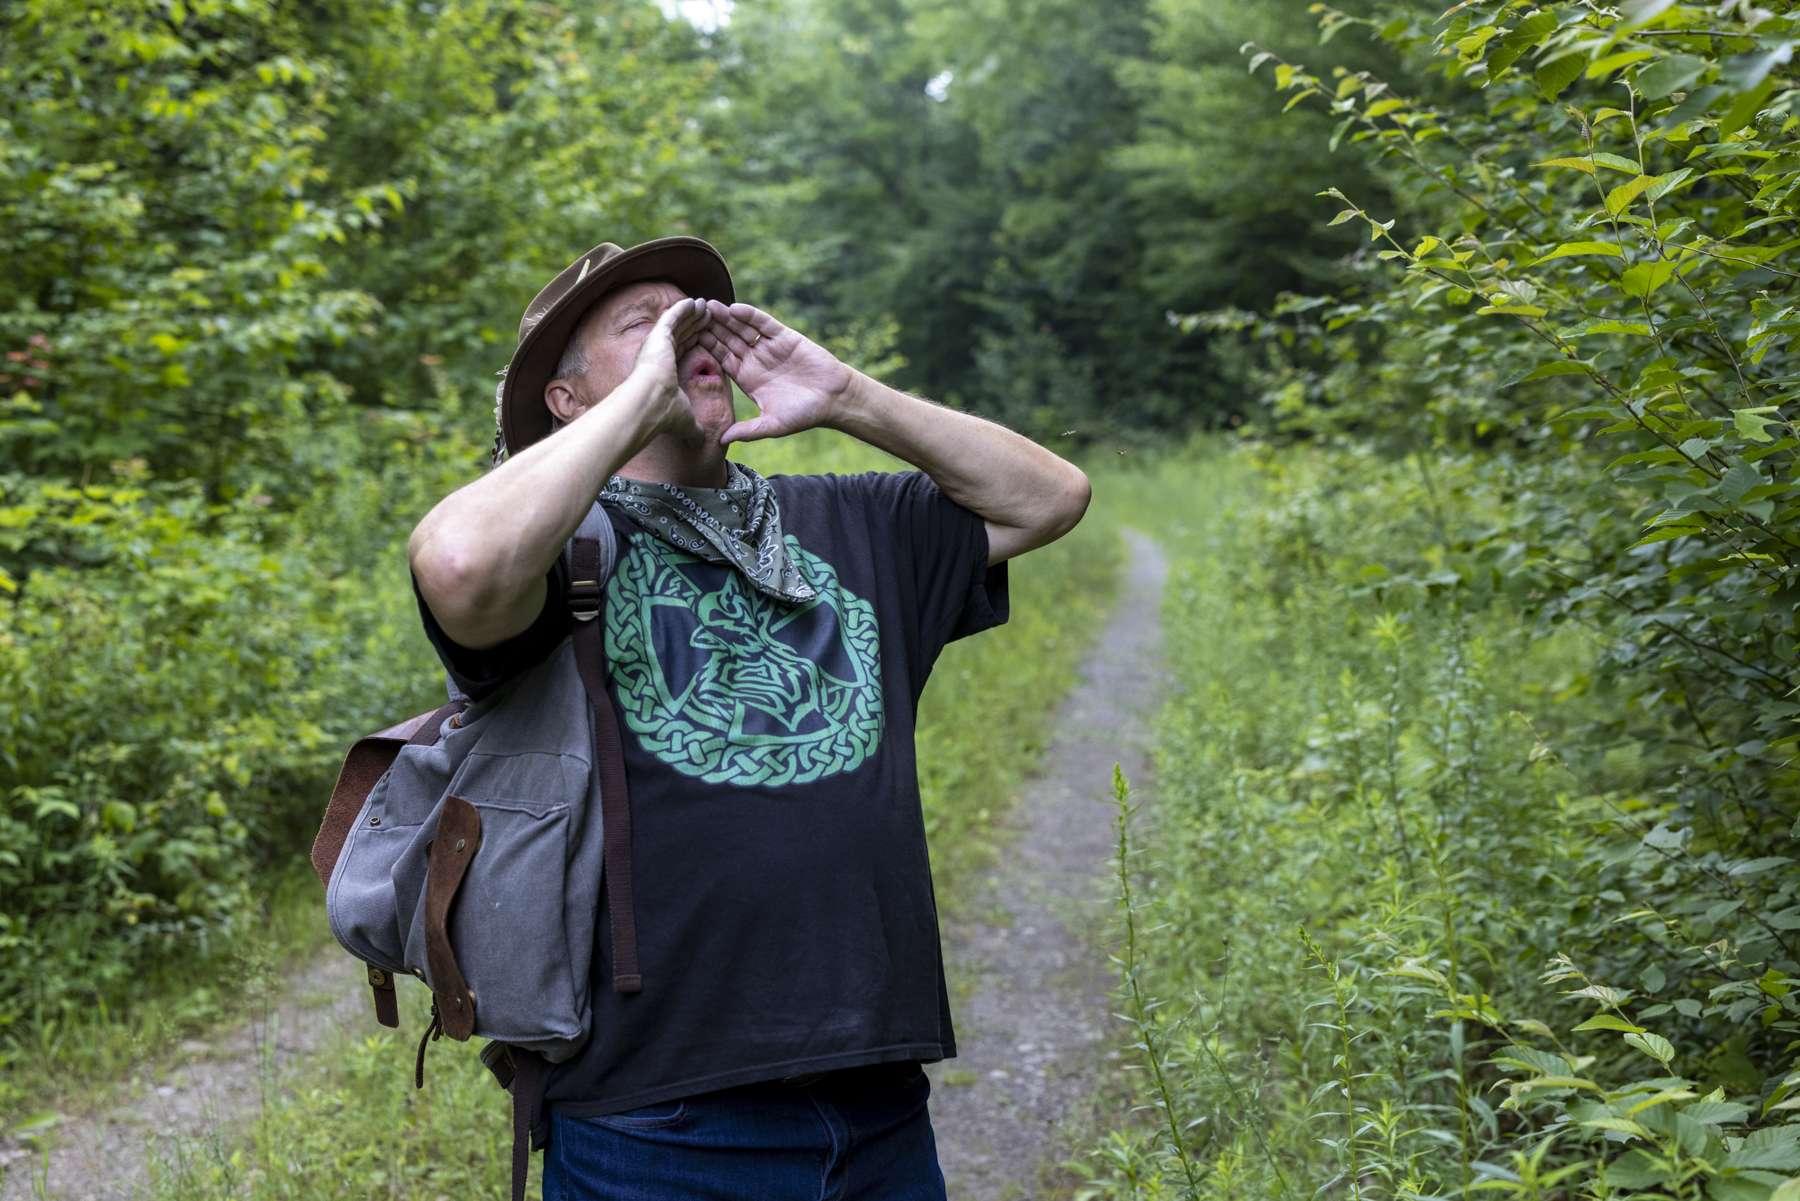 Wolf advocate Joe Butera performs a wolf howl in th northern Adirondacks. Photo by Mike Lynch